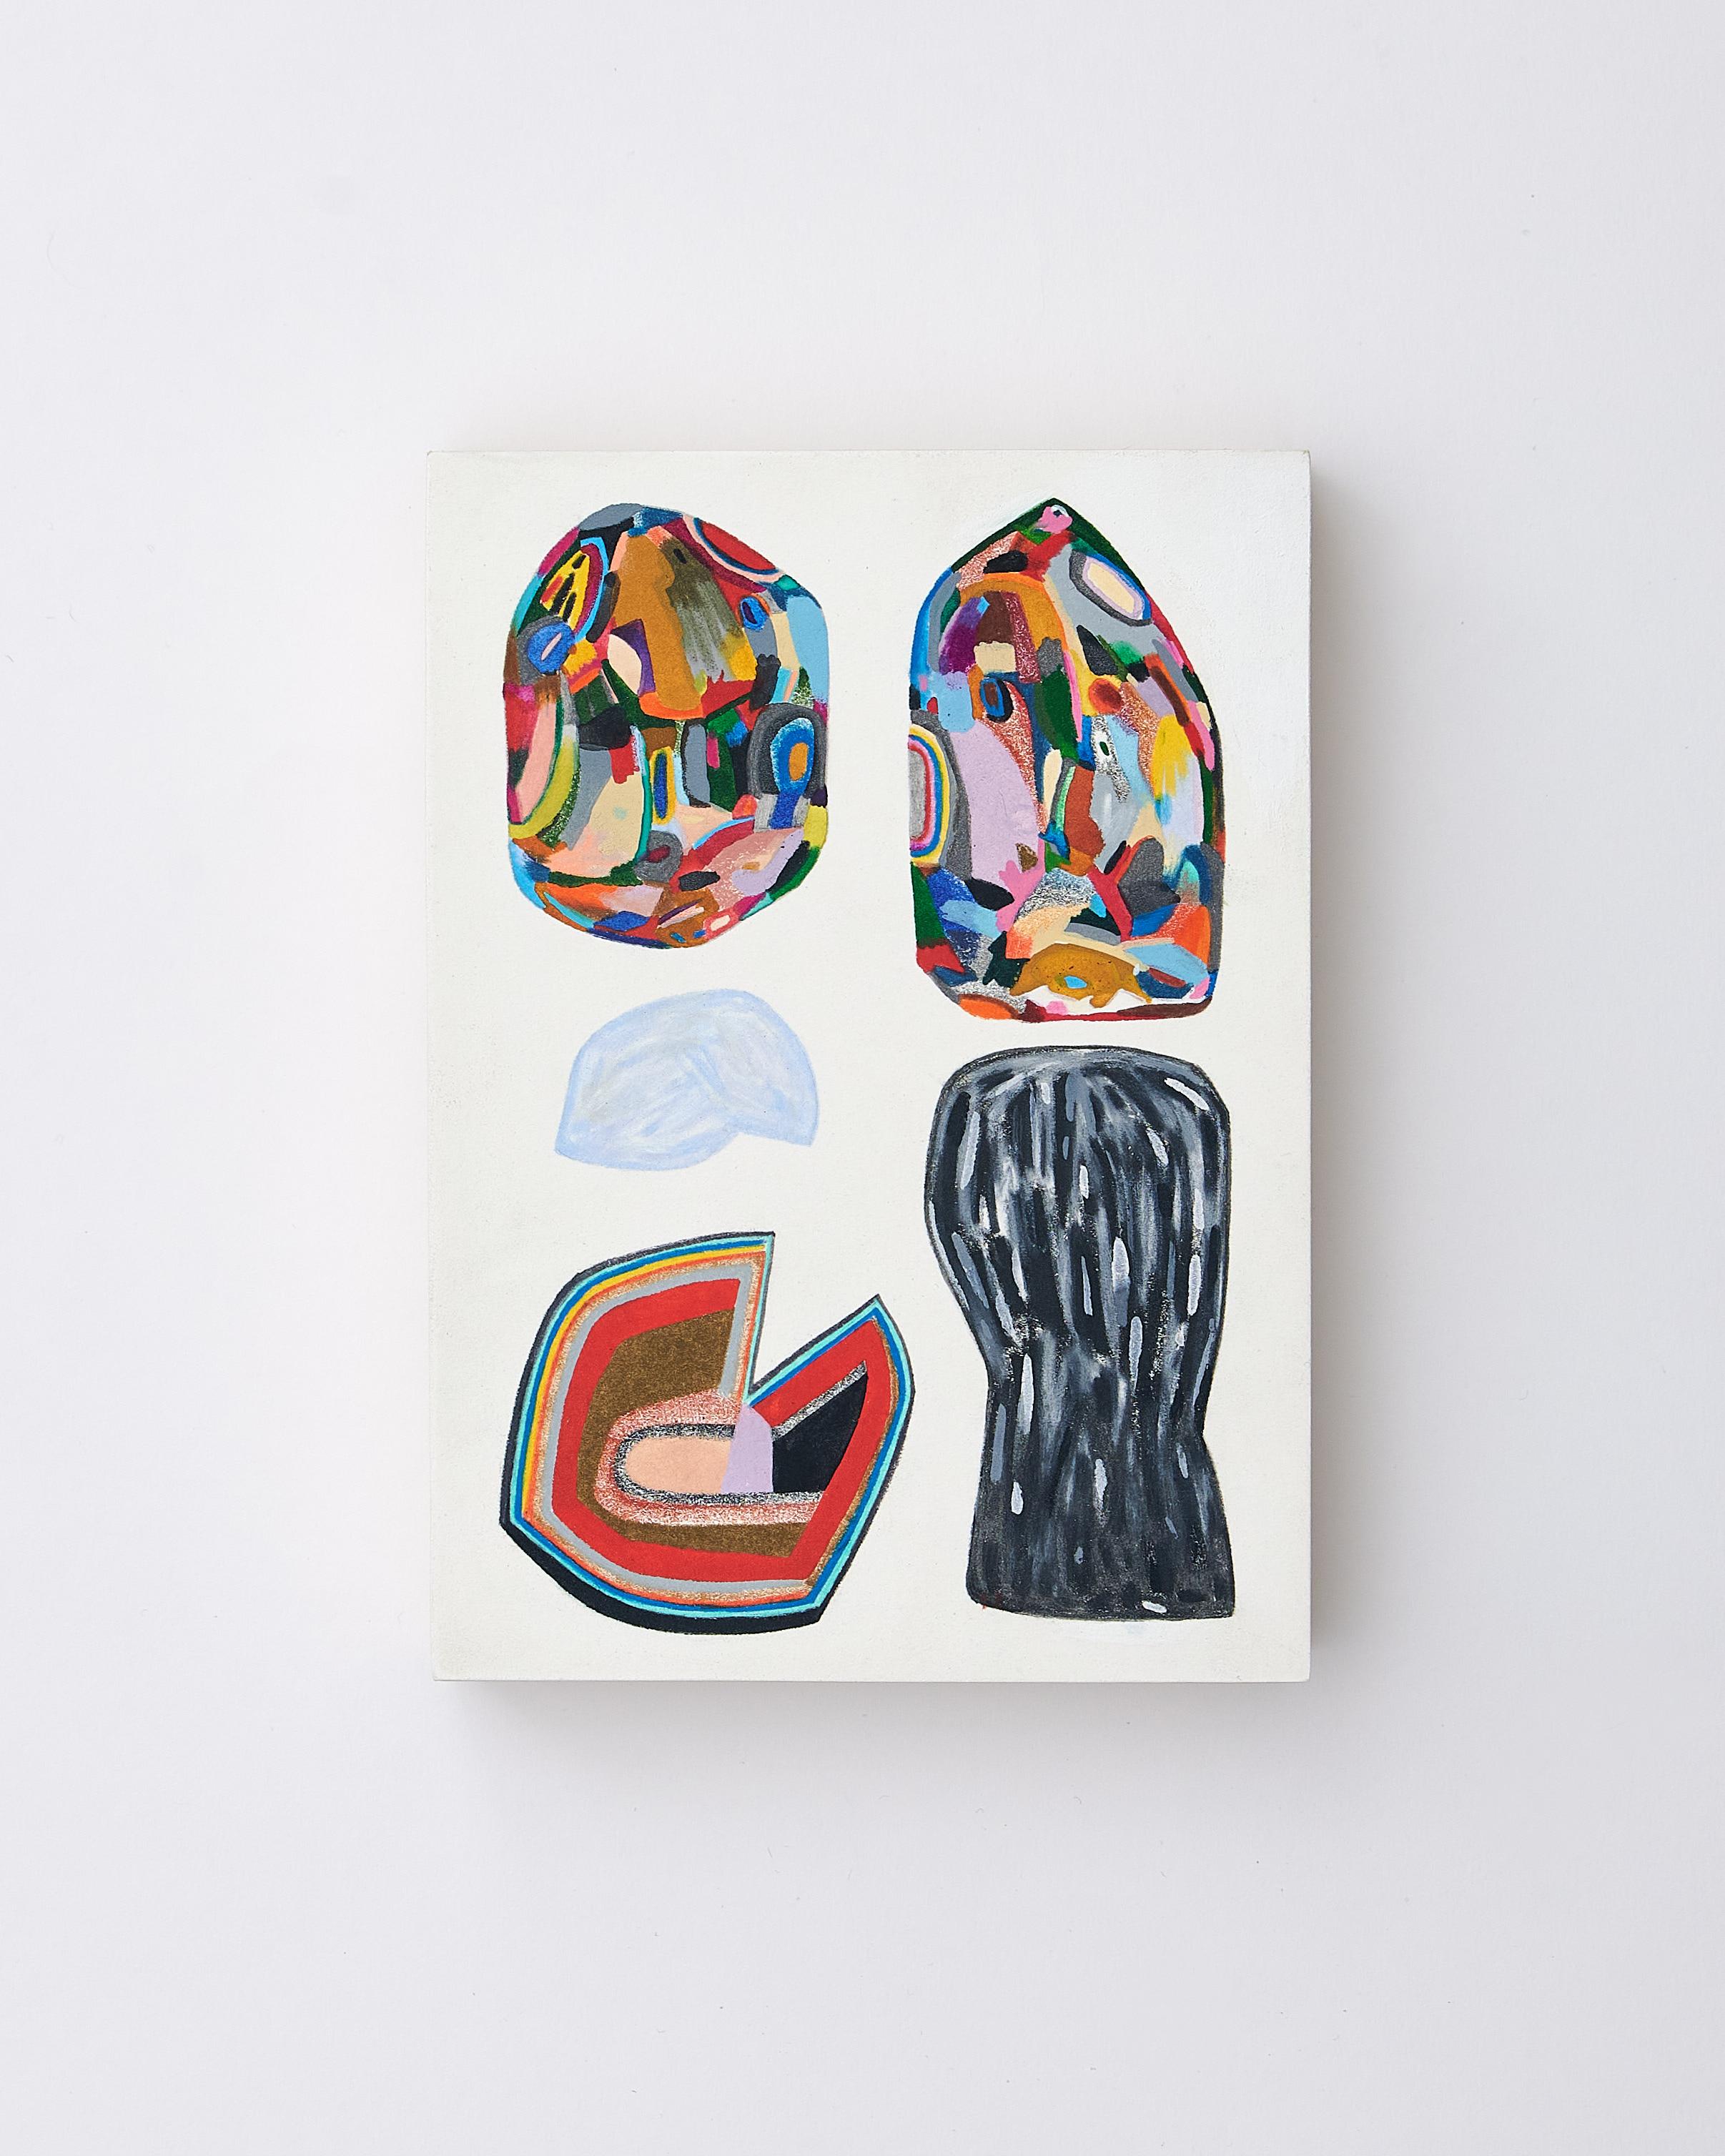 Untitled, Small Vessels No. 3, multicolored abstract work on paper - Art by Sasha Hallock